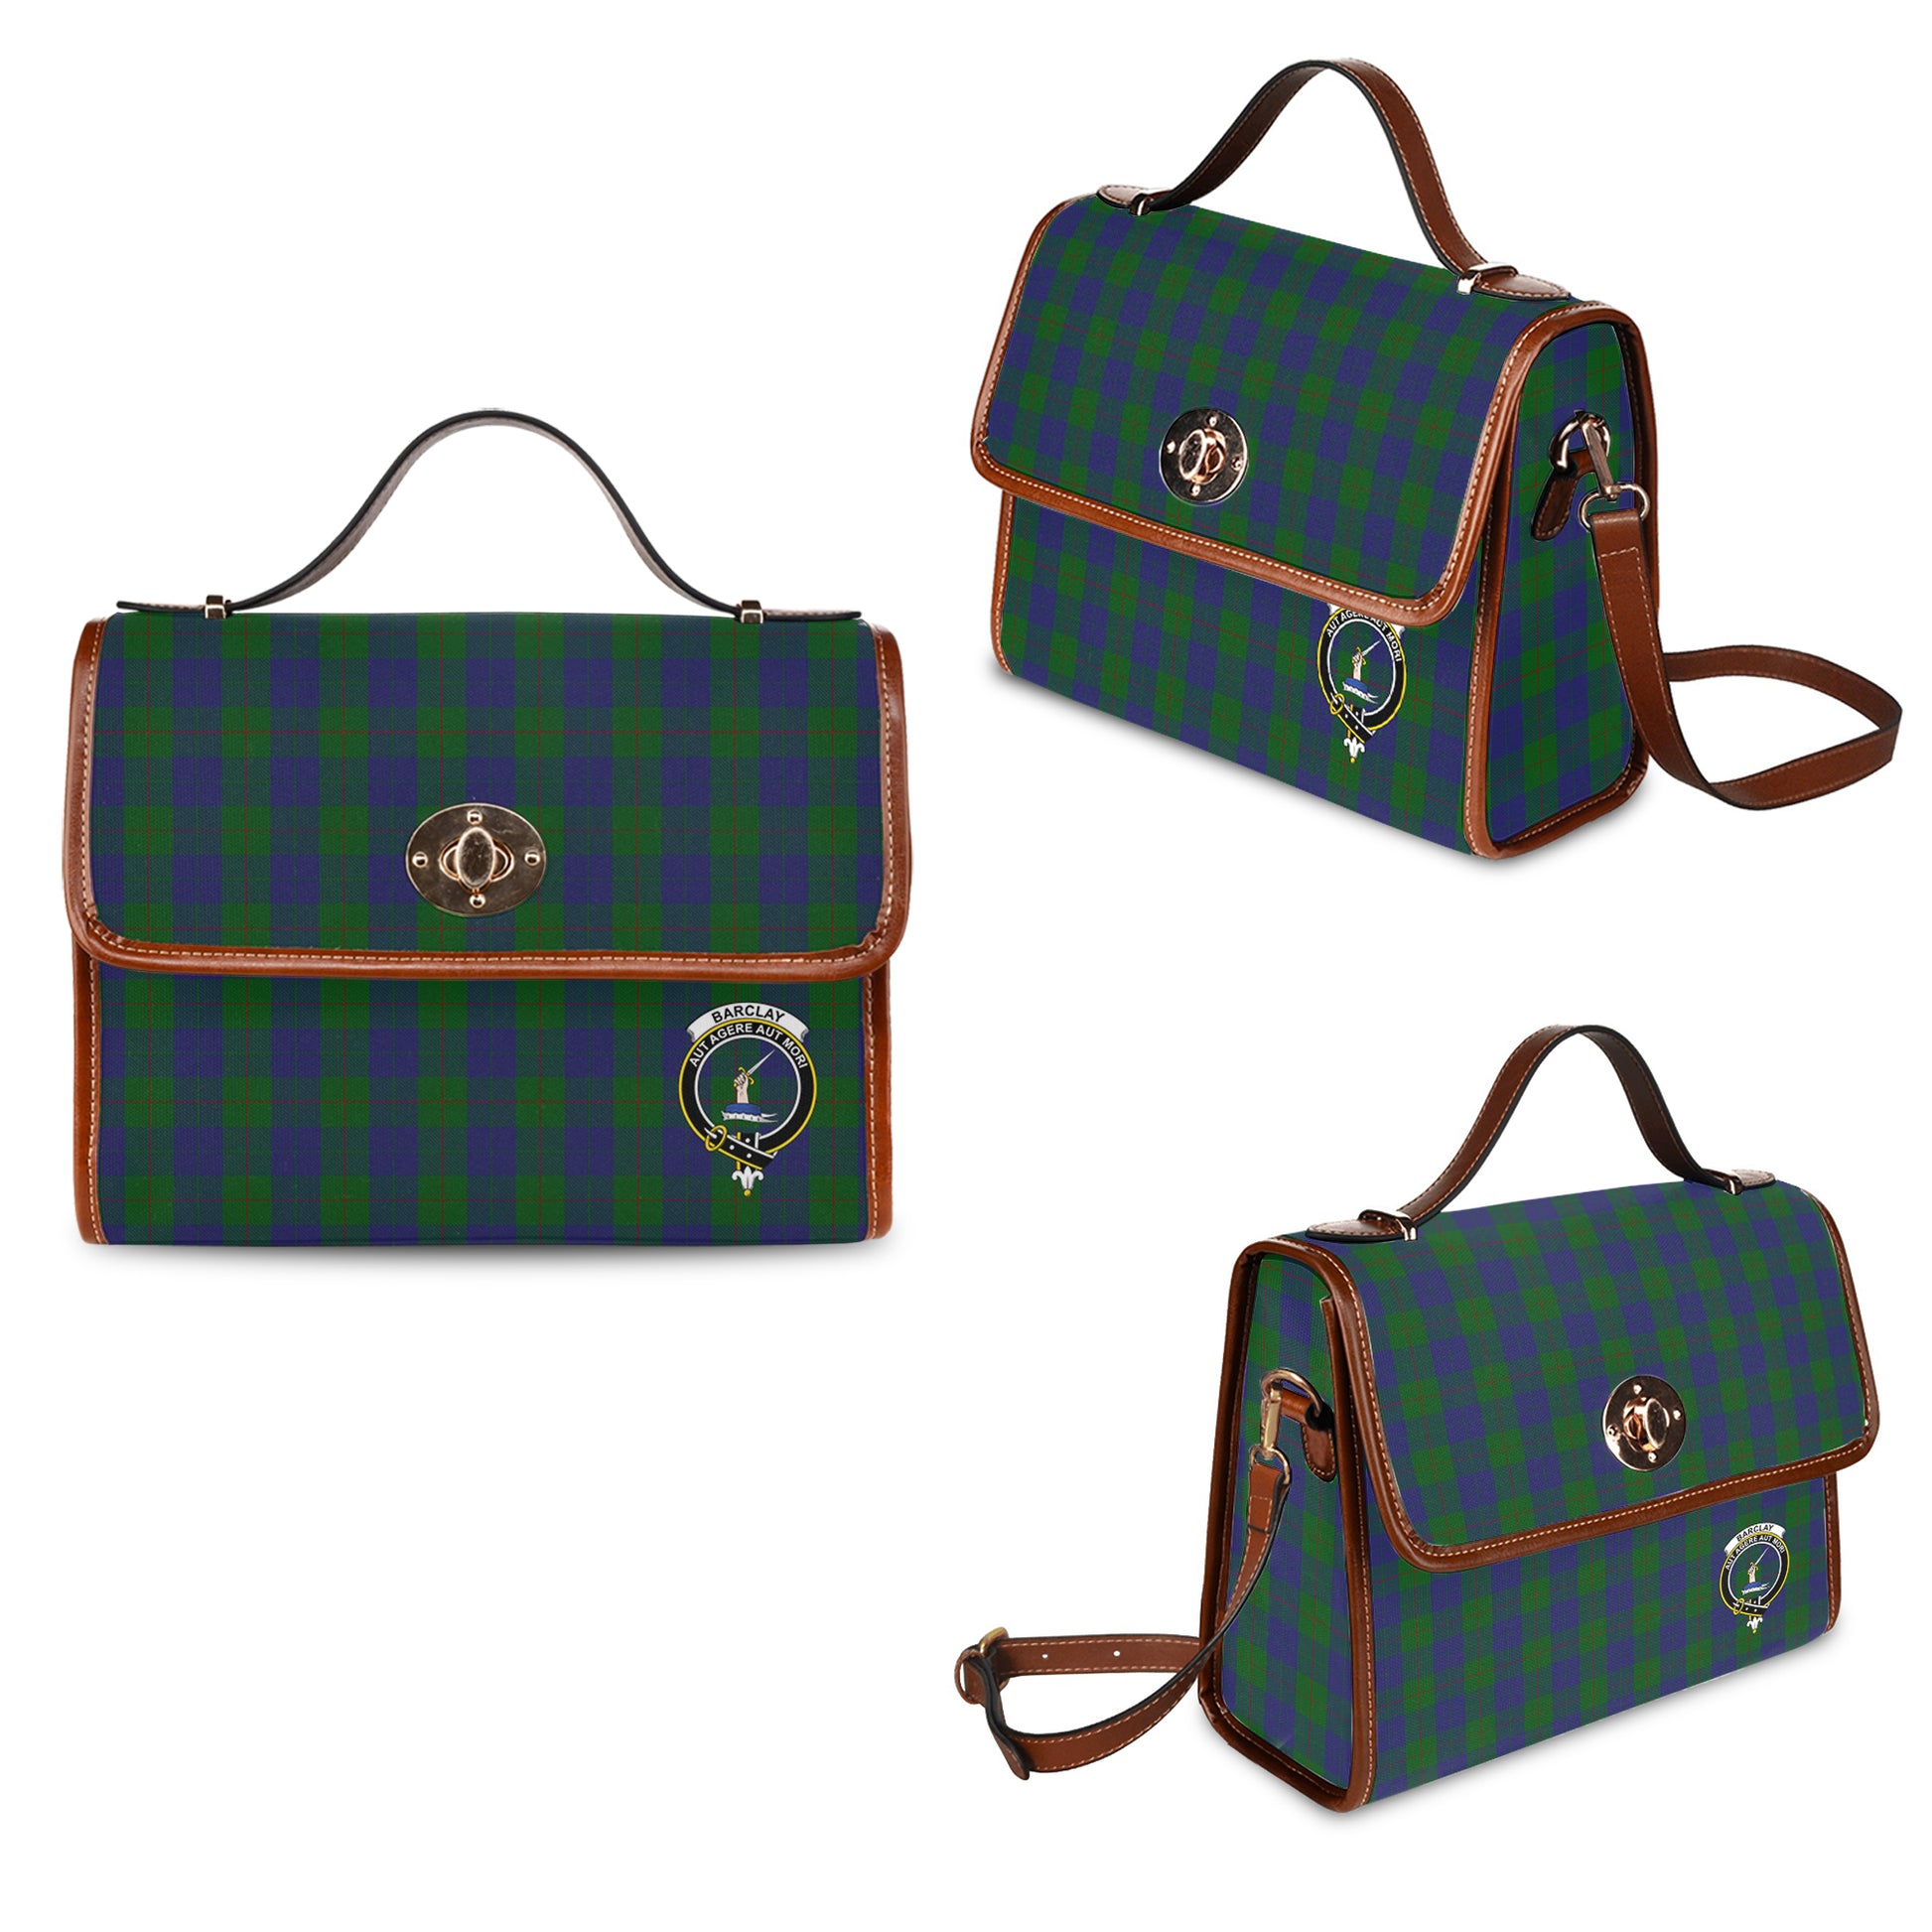 Barclay Tartan Leather Strap Waterproof Canvas Bag with Family Crest One Size 34cm * 42cm (13.4" x 16.5") - Tartanvibesclothing